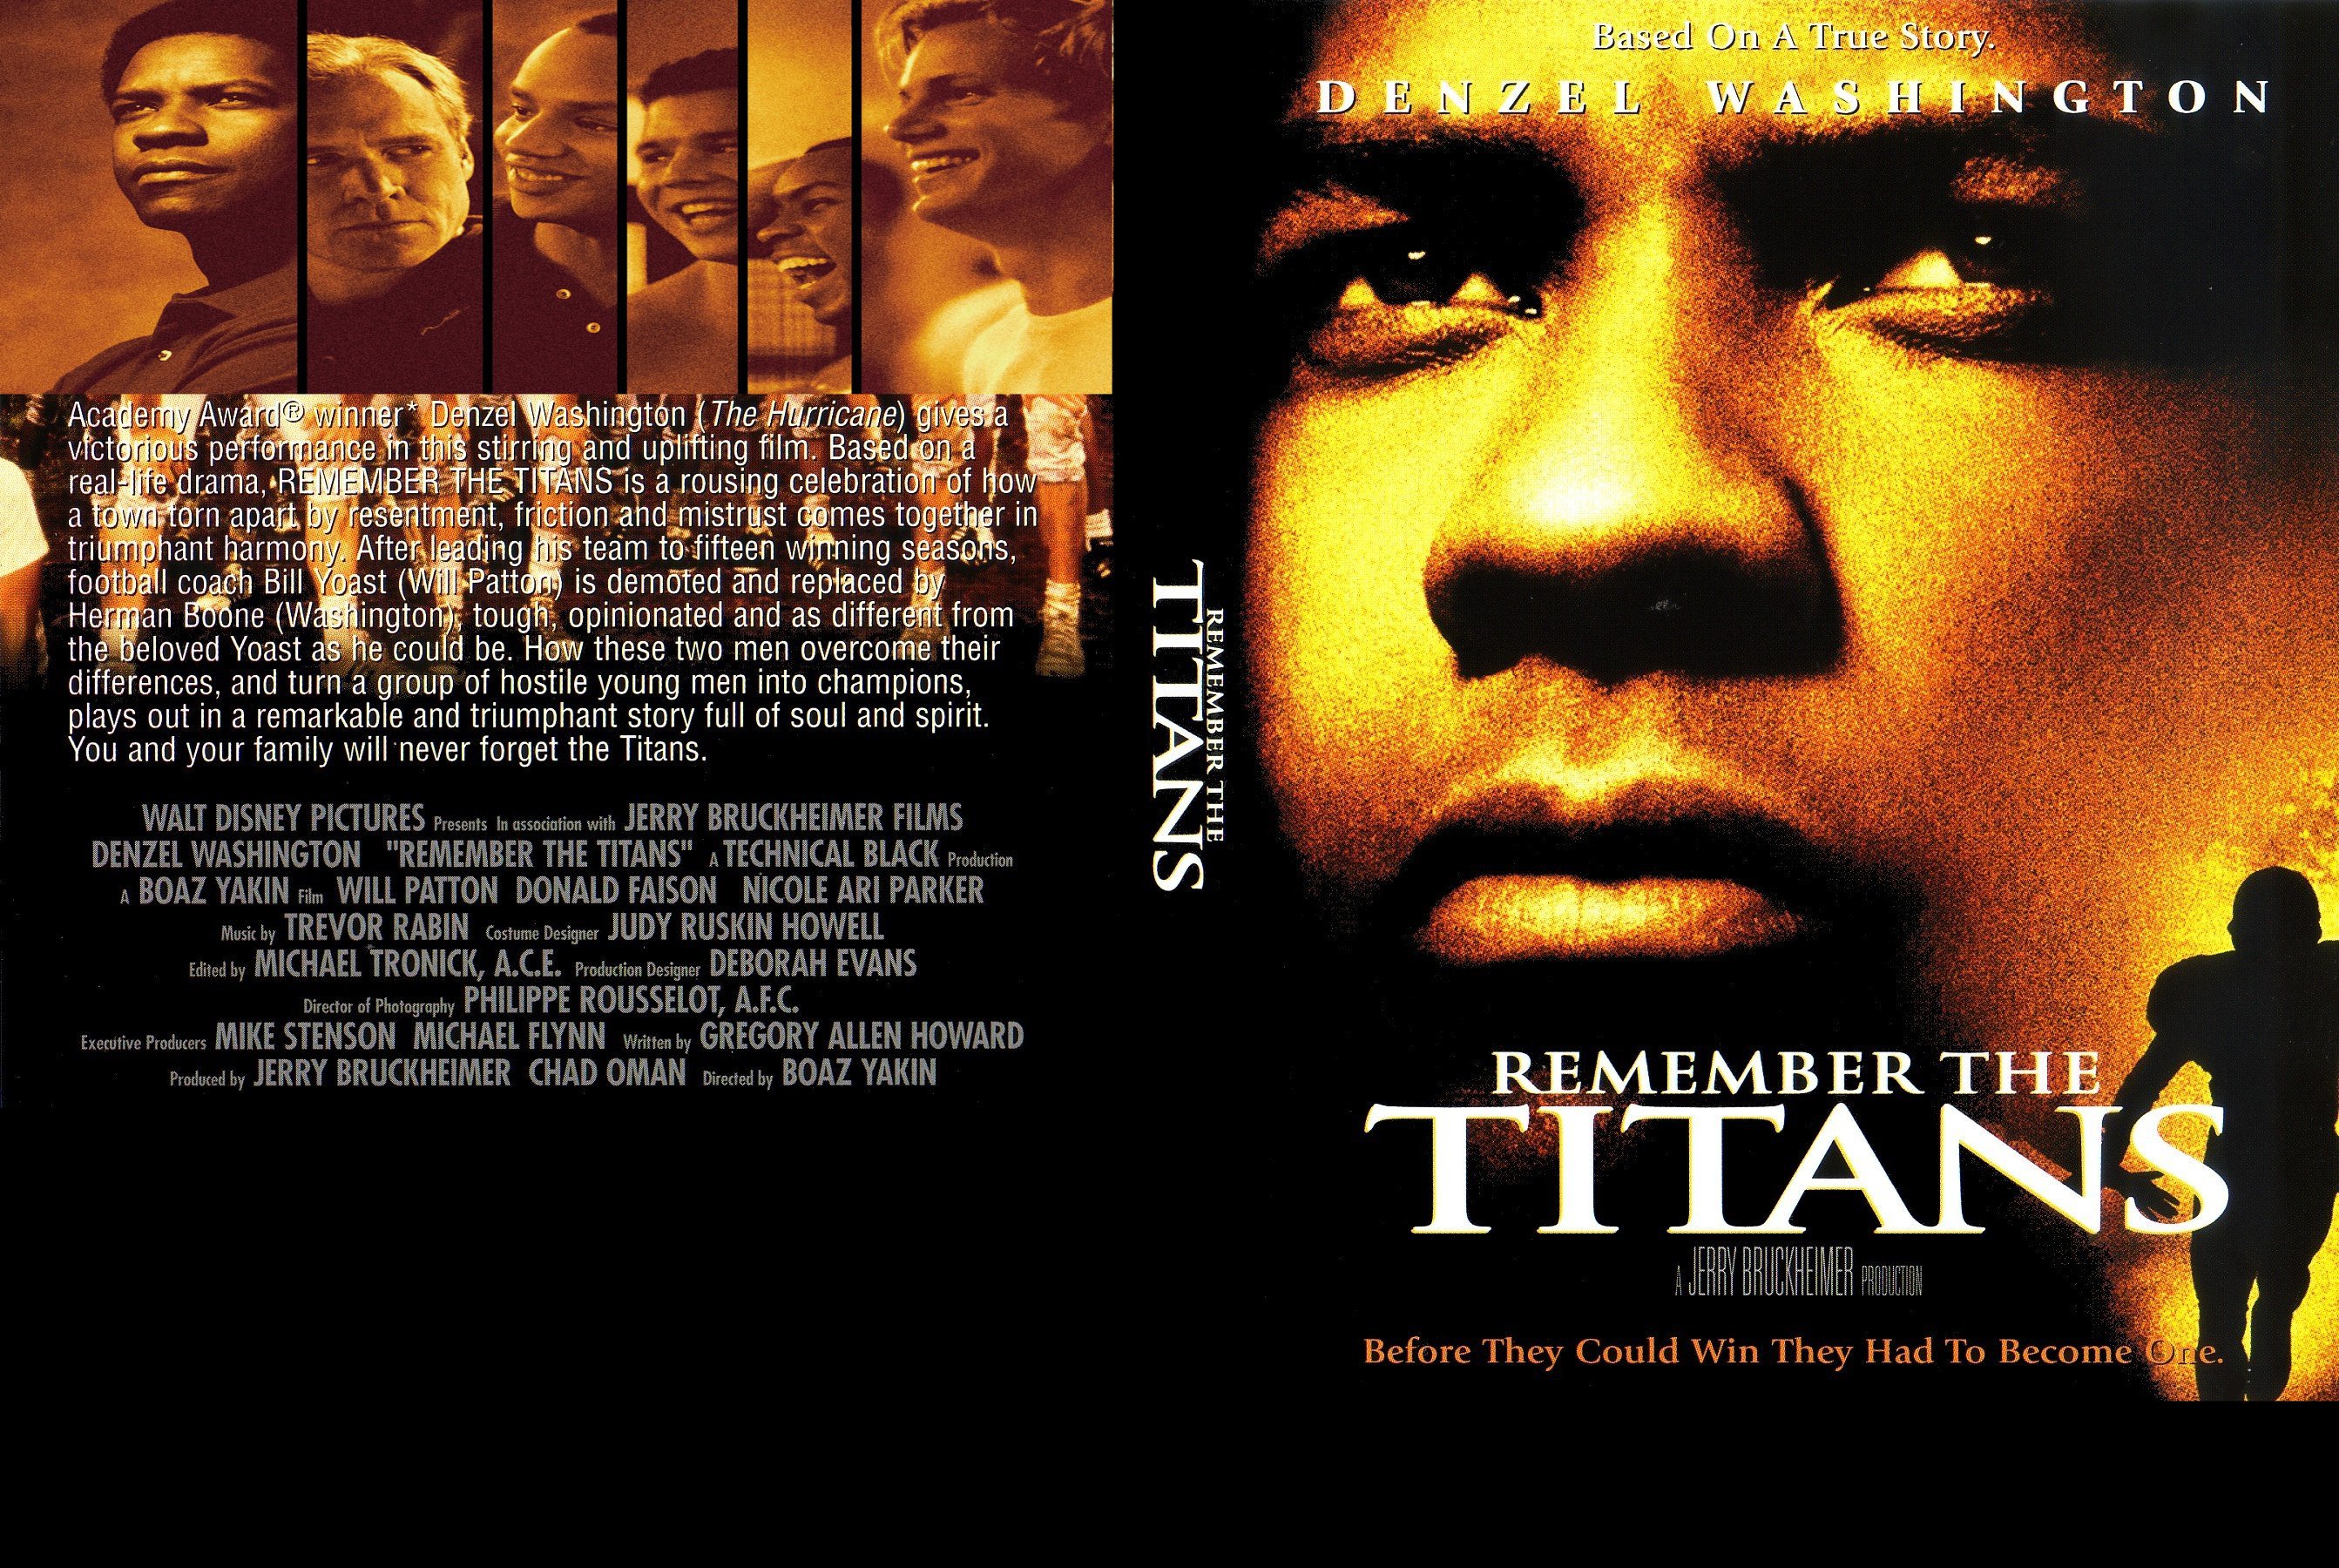 Remember the story. Вспоминая титанов DVD 2000. Remember the Titans. Remember the Titans poster.